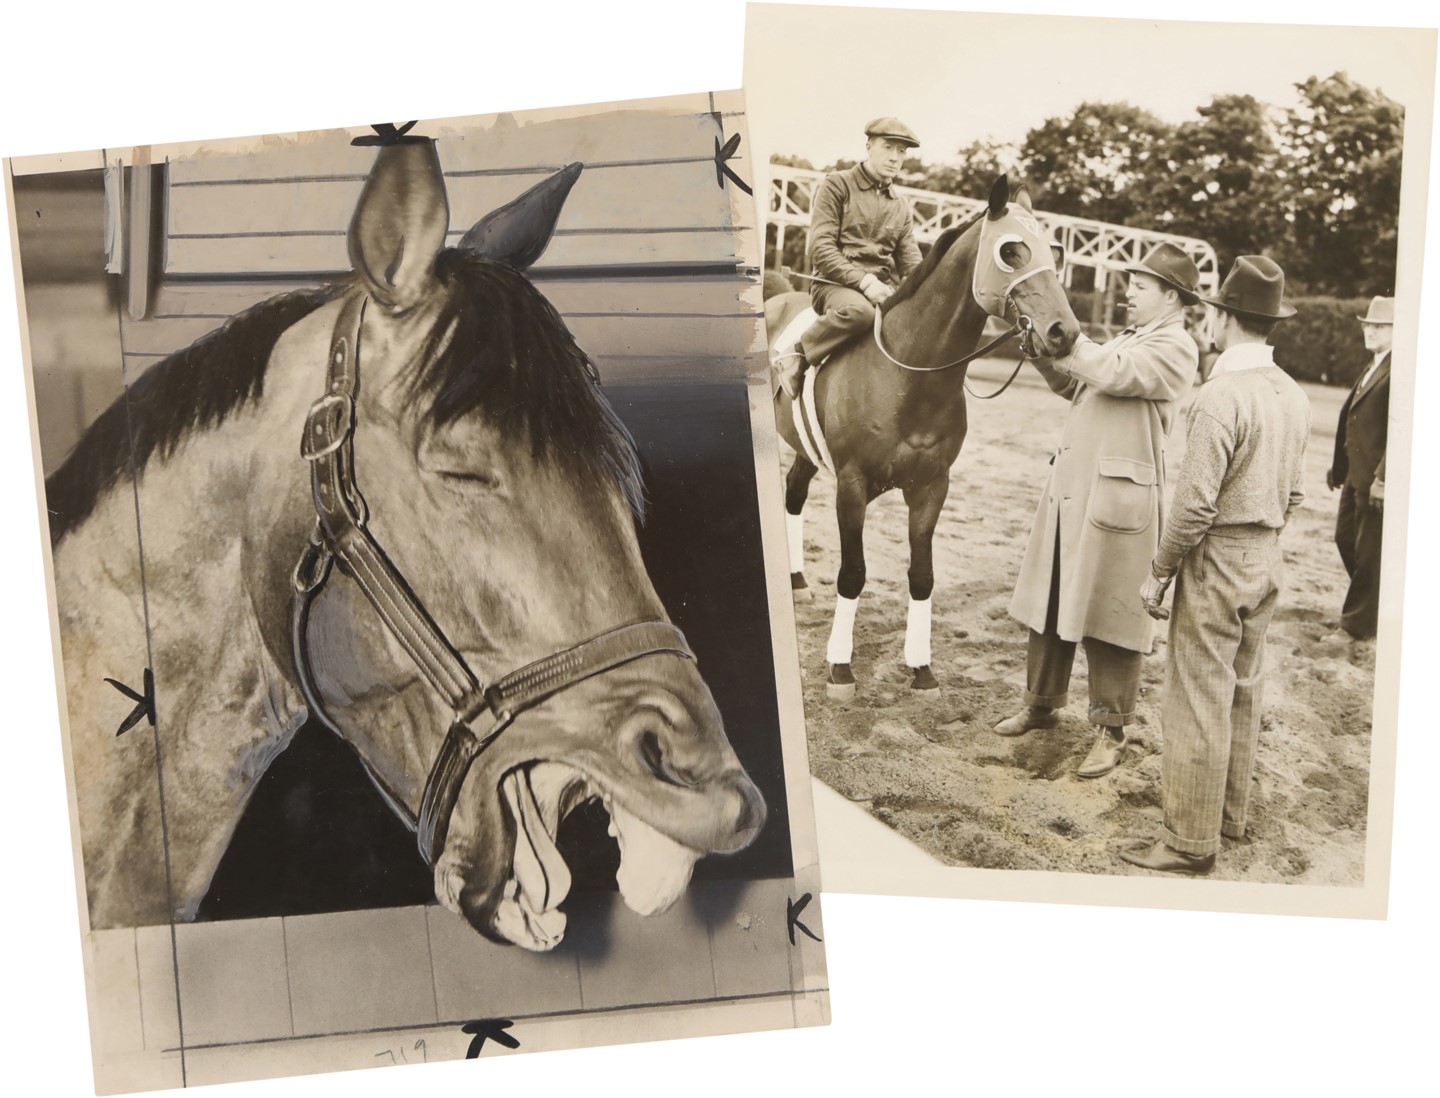 Details about   Keeneland Collector Series Vintage Photo Edition Finish Line 1938 Seabiscuit 